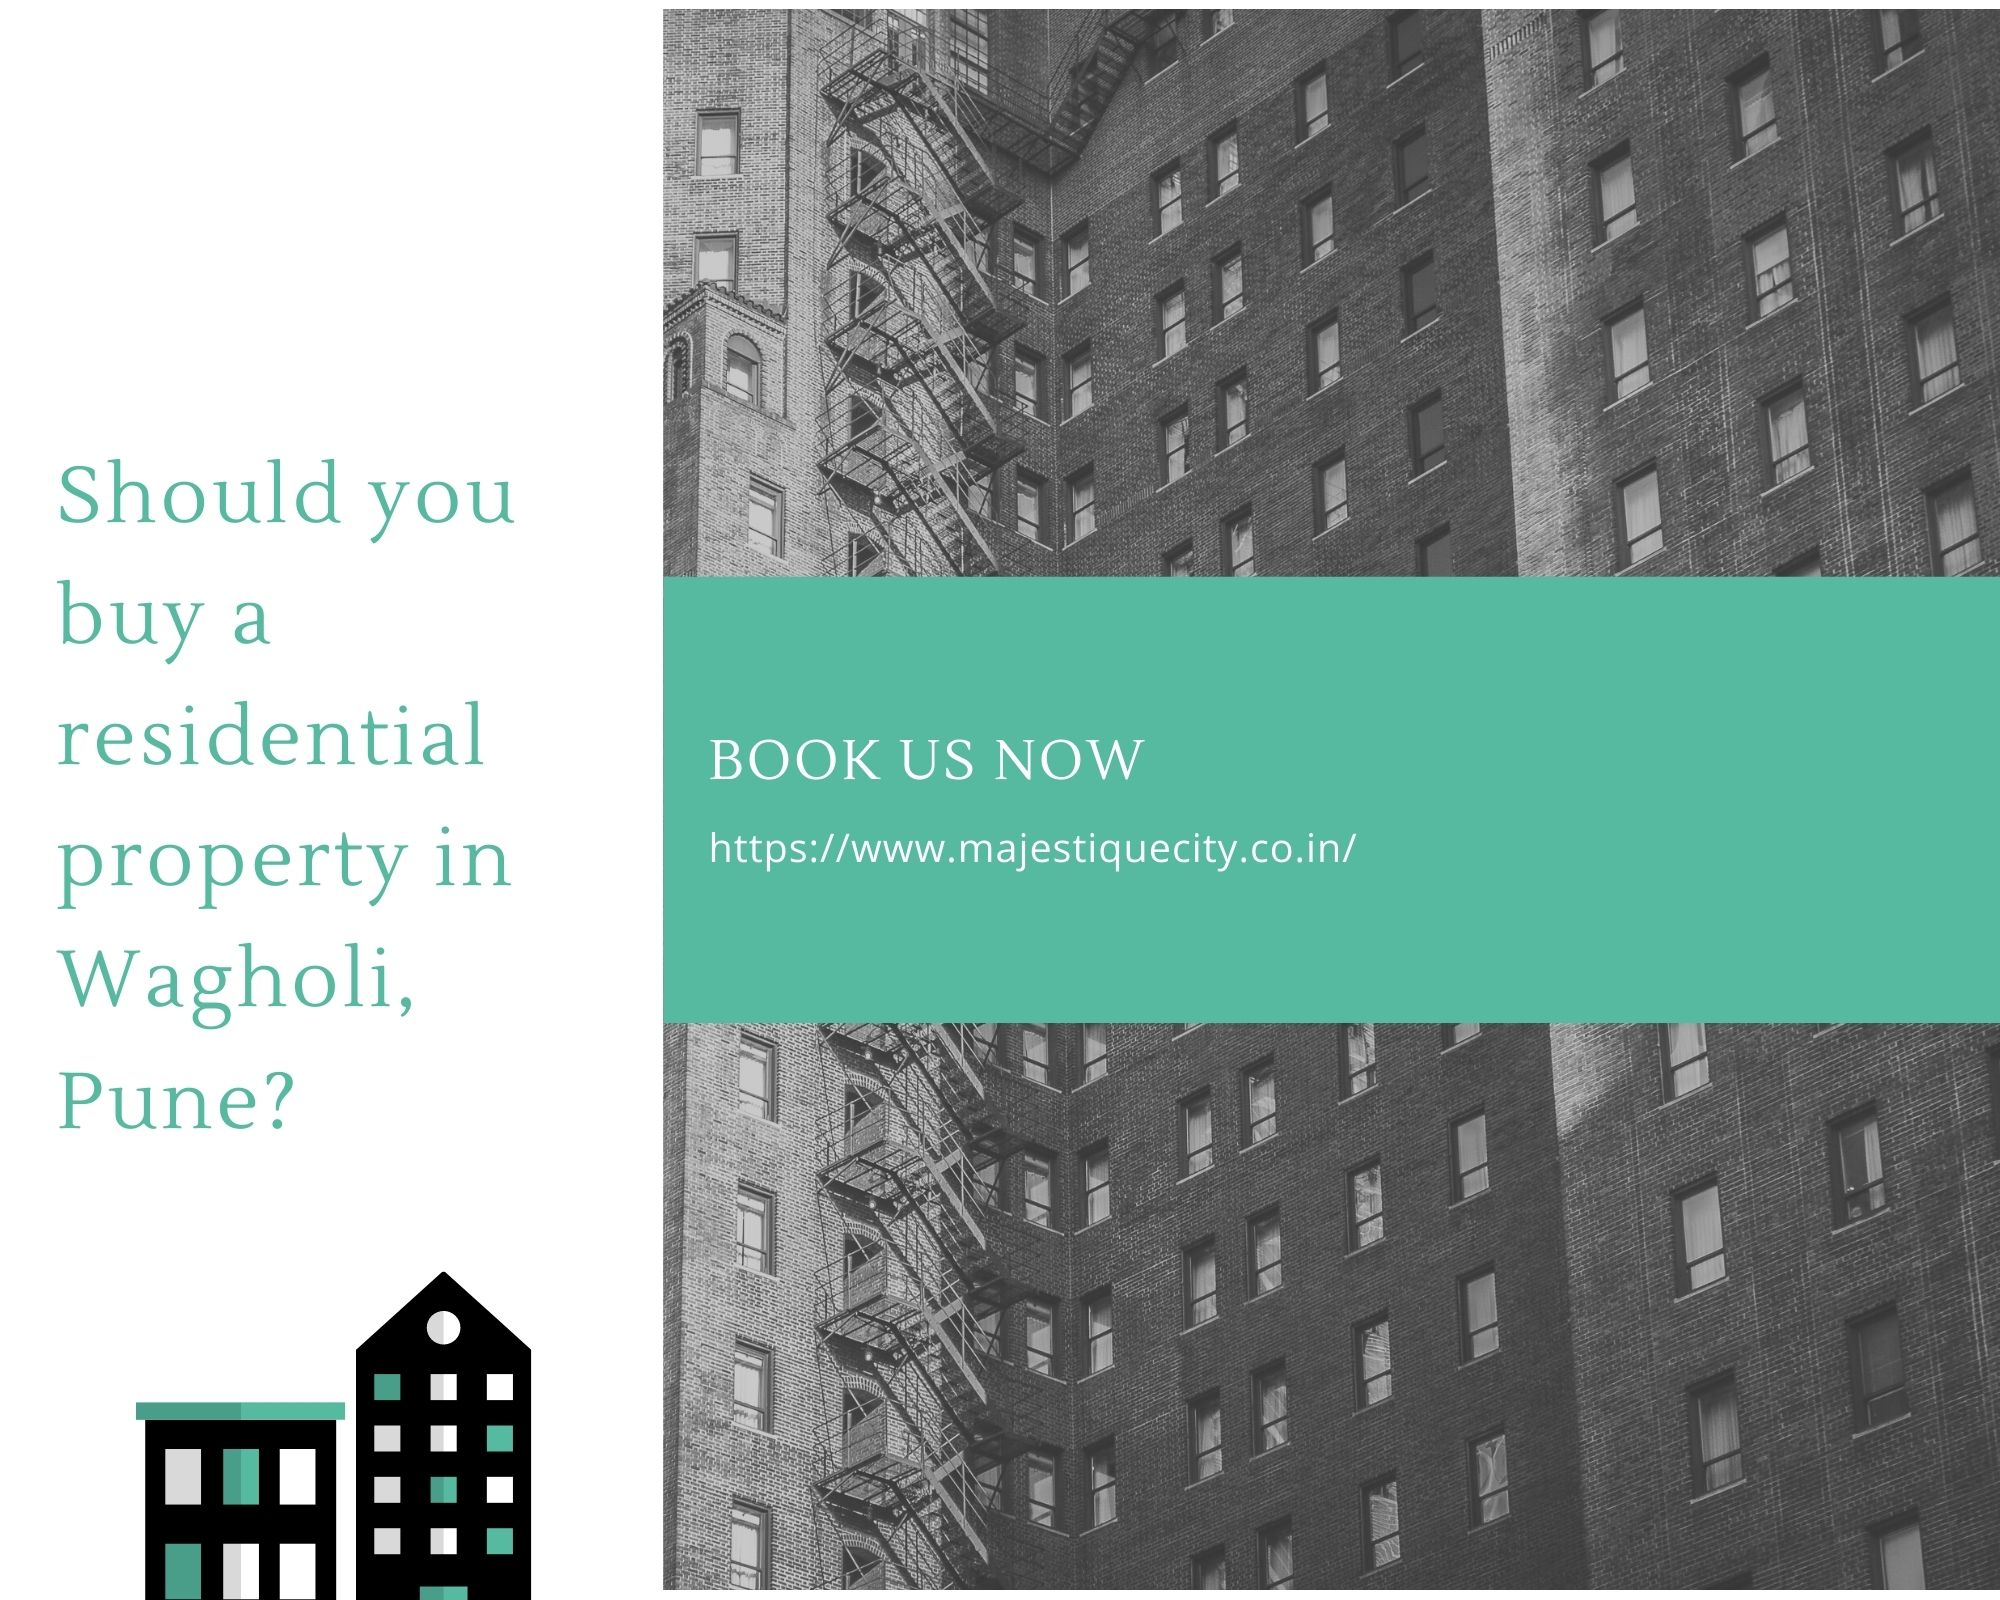 Should you buy a residential property in Wagholi, Pune?